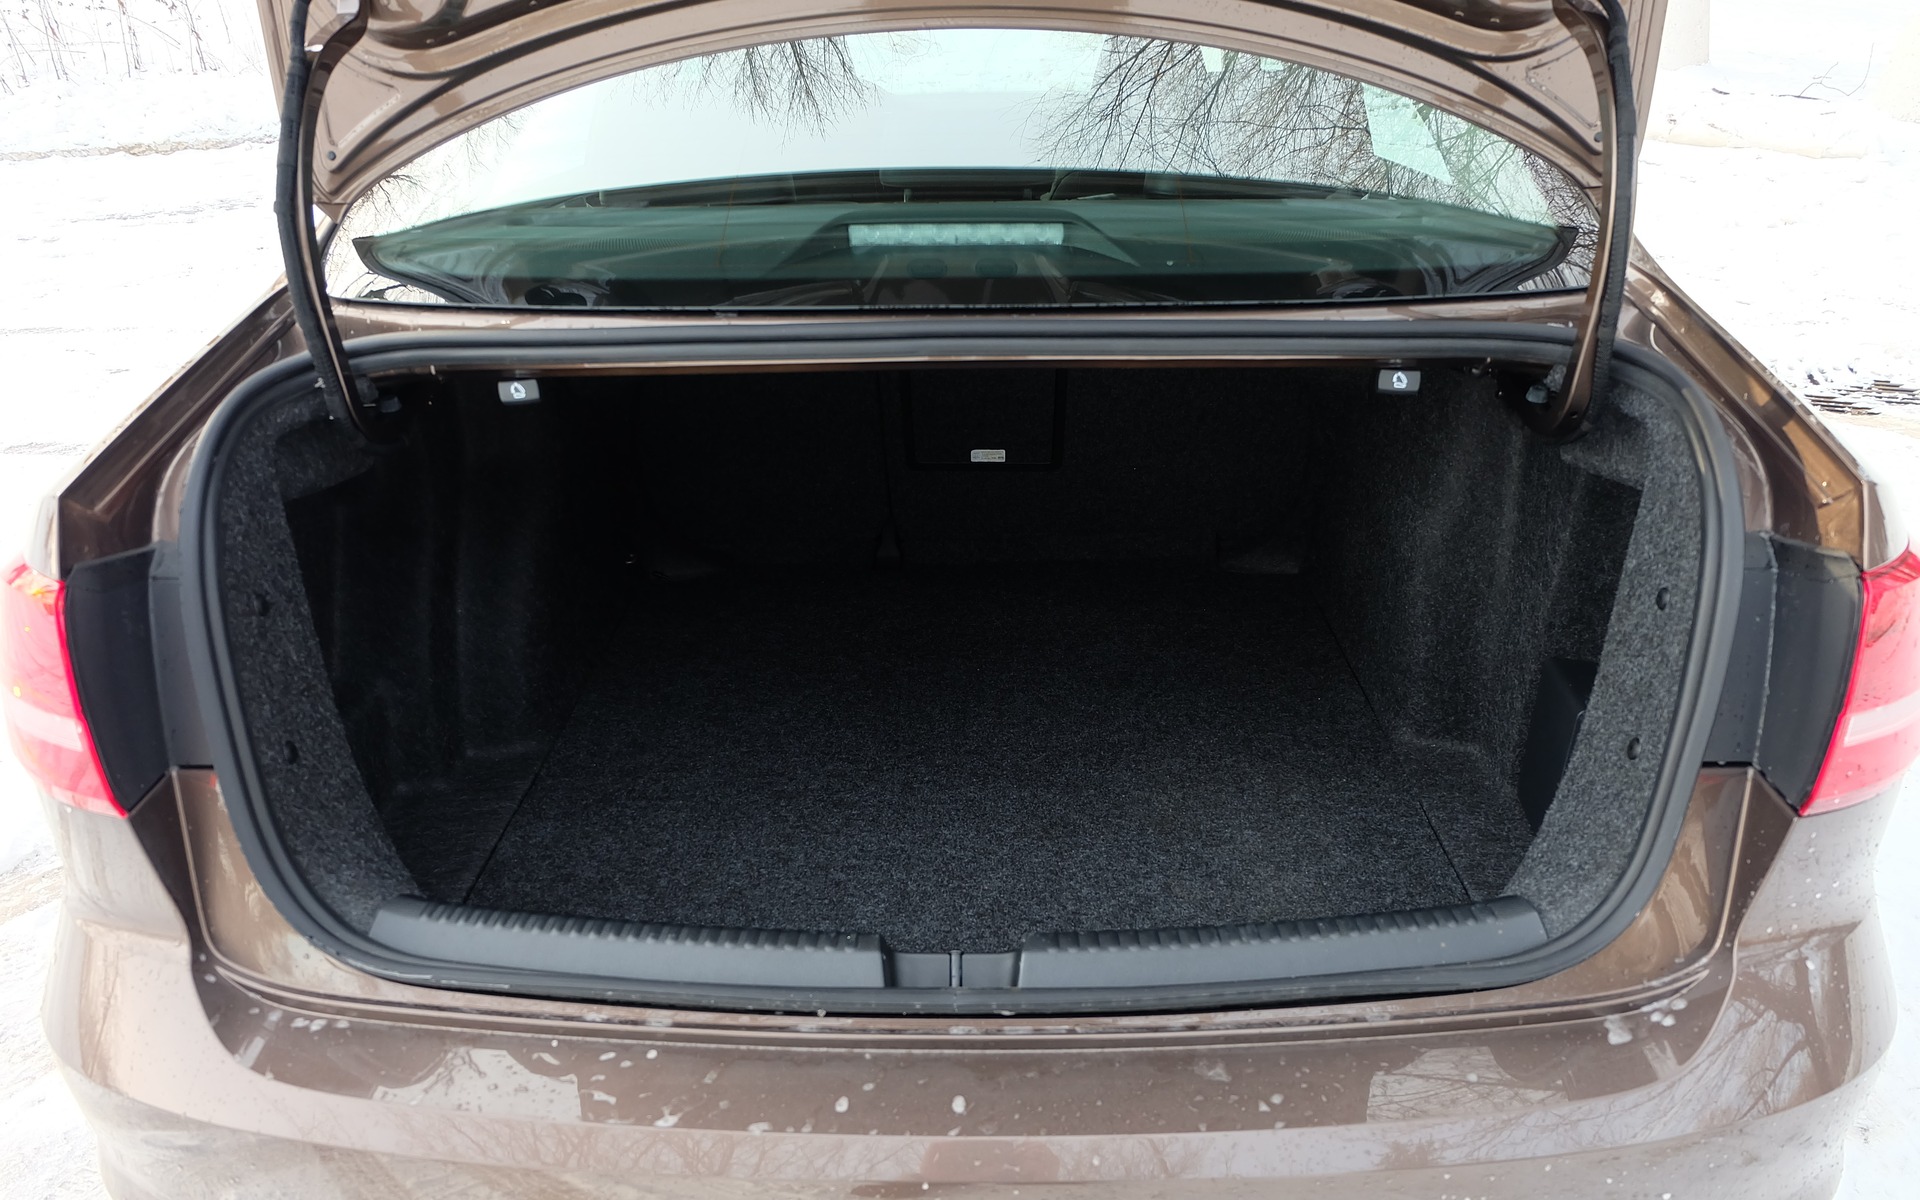 The Jetta’s trunk is vast, its opening is large and it opens high enough.